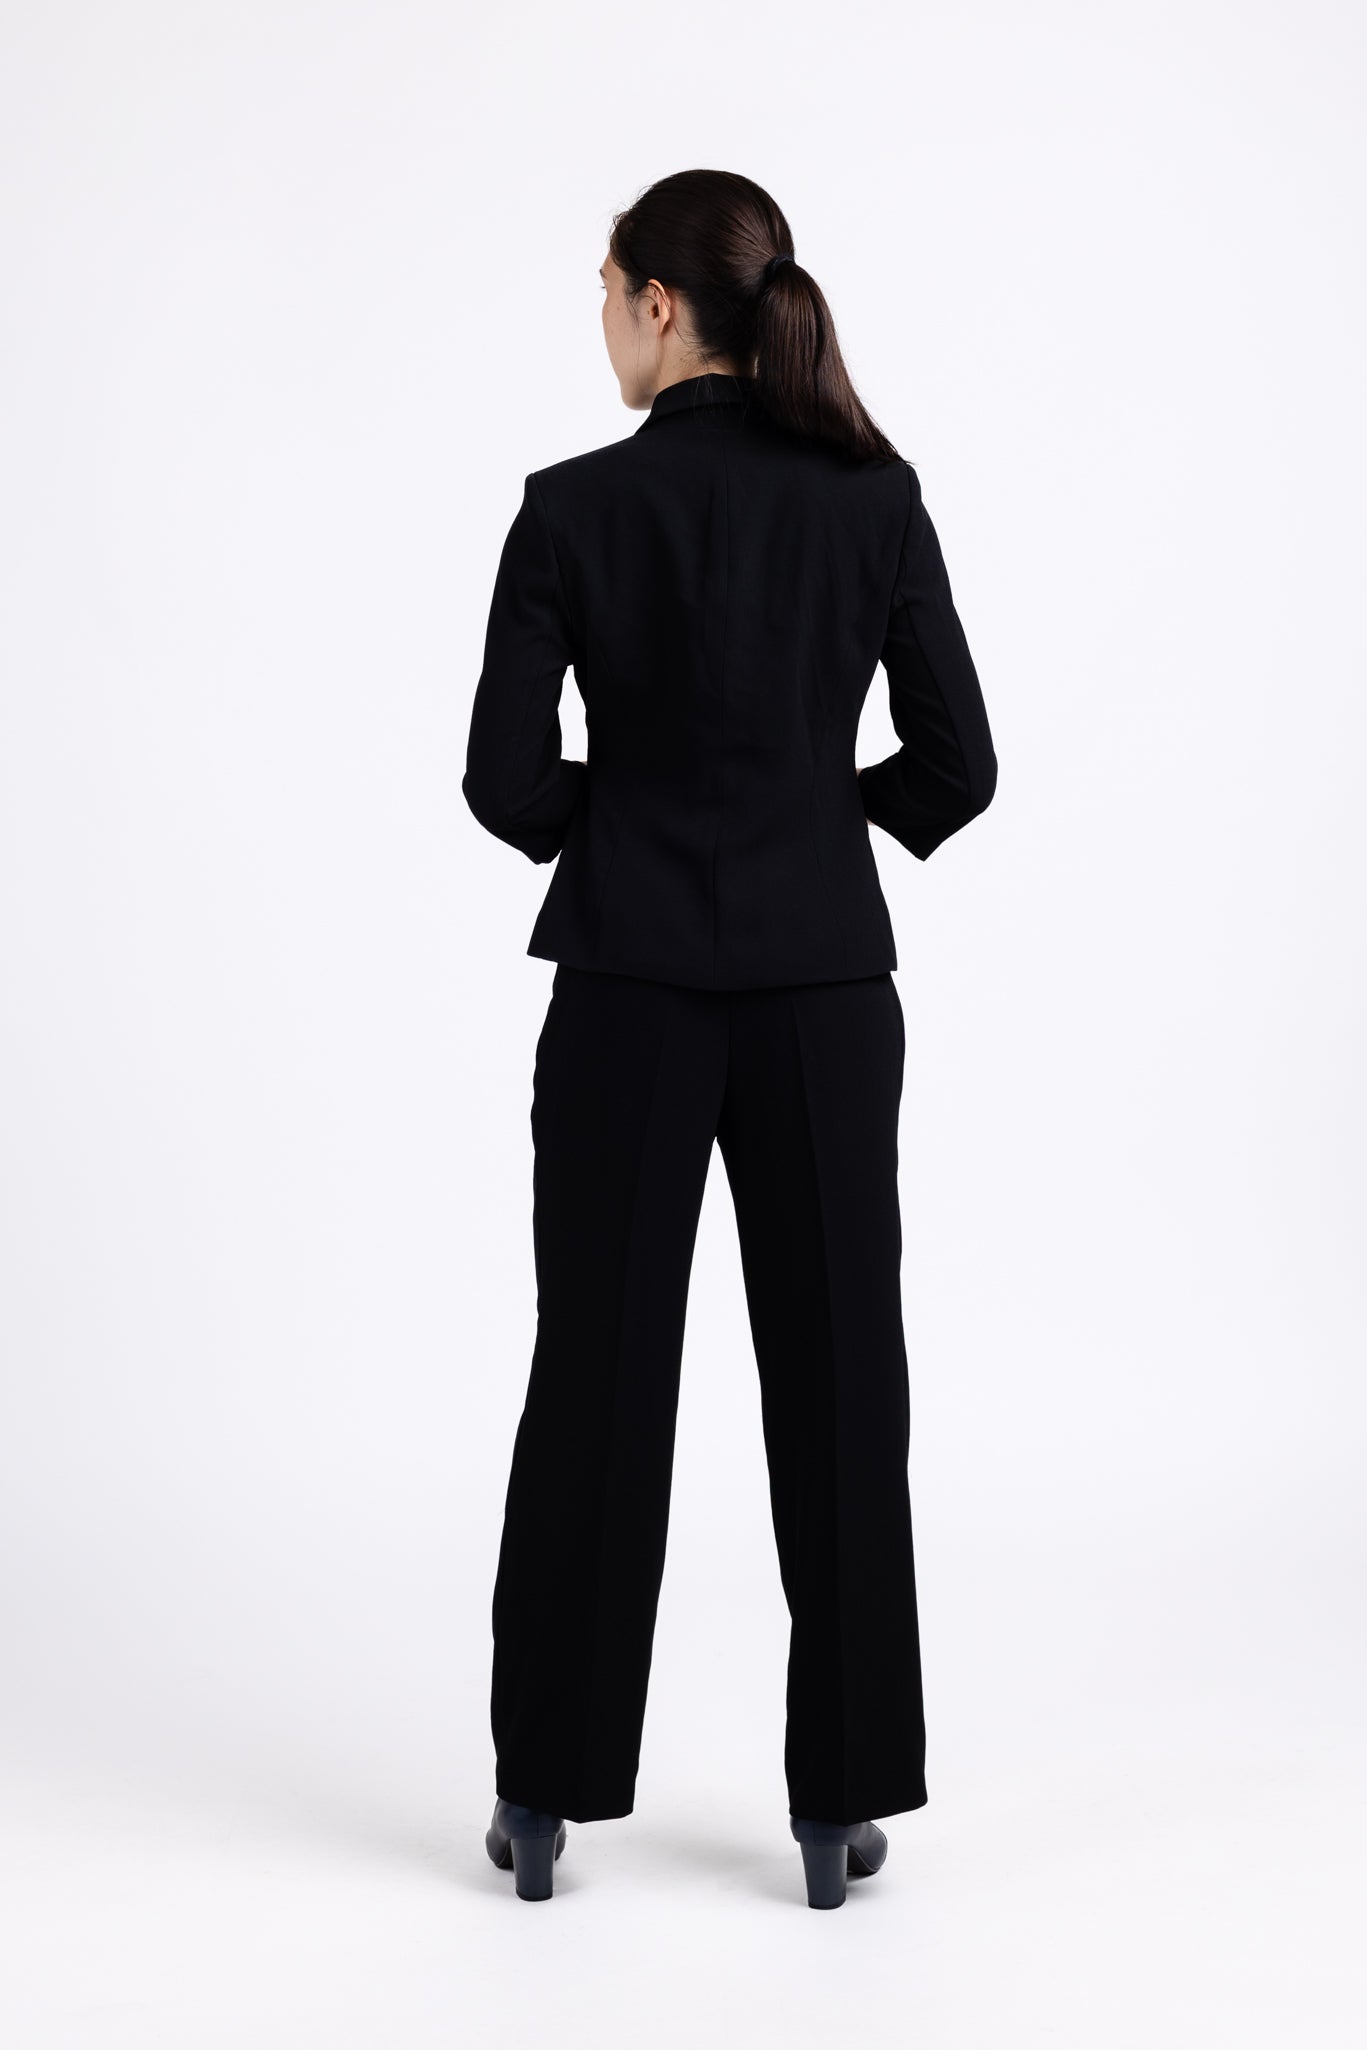 Maeve Buckle Detail Belted Tailored Blazer